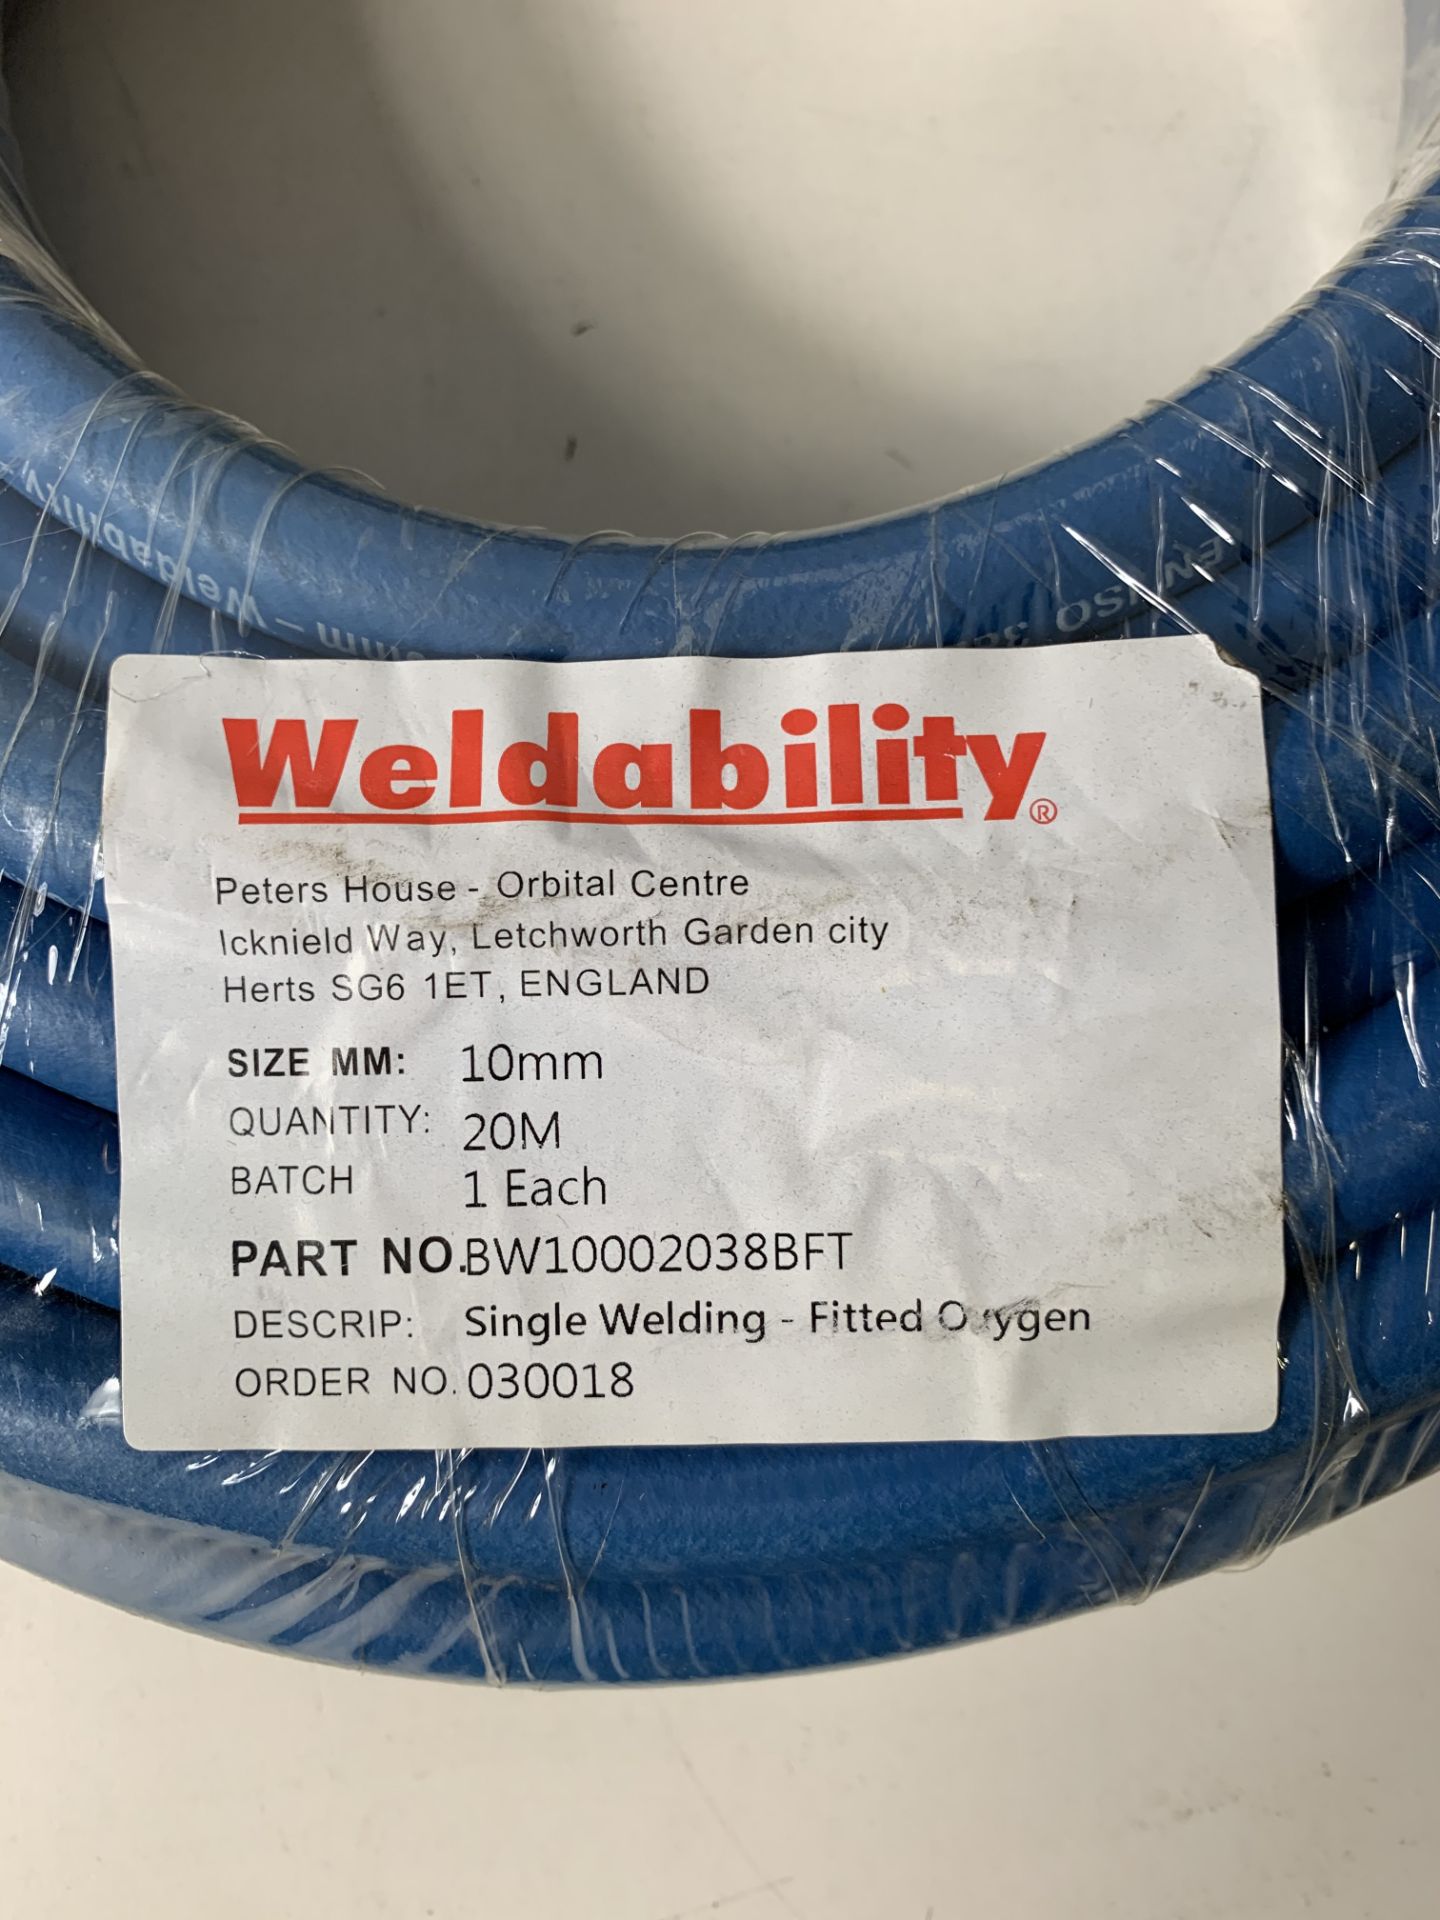 5 X Weldability Fitted Welding Pipes - Image 2 of 3